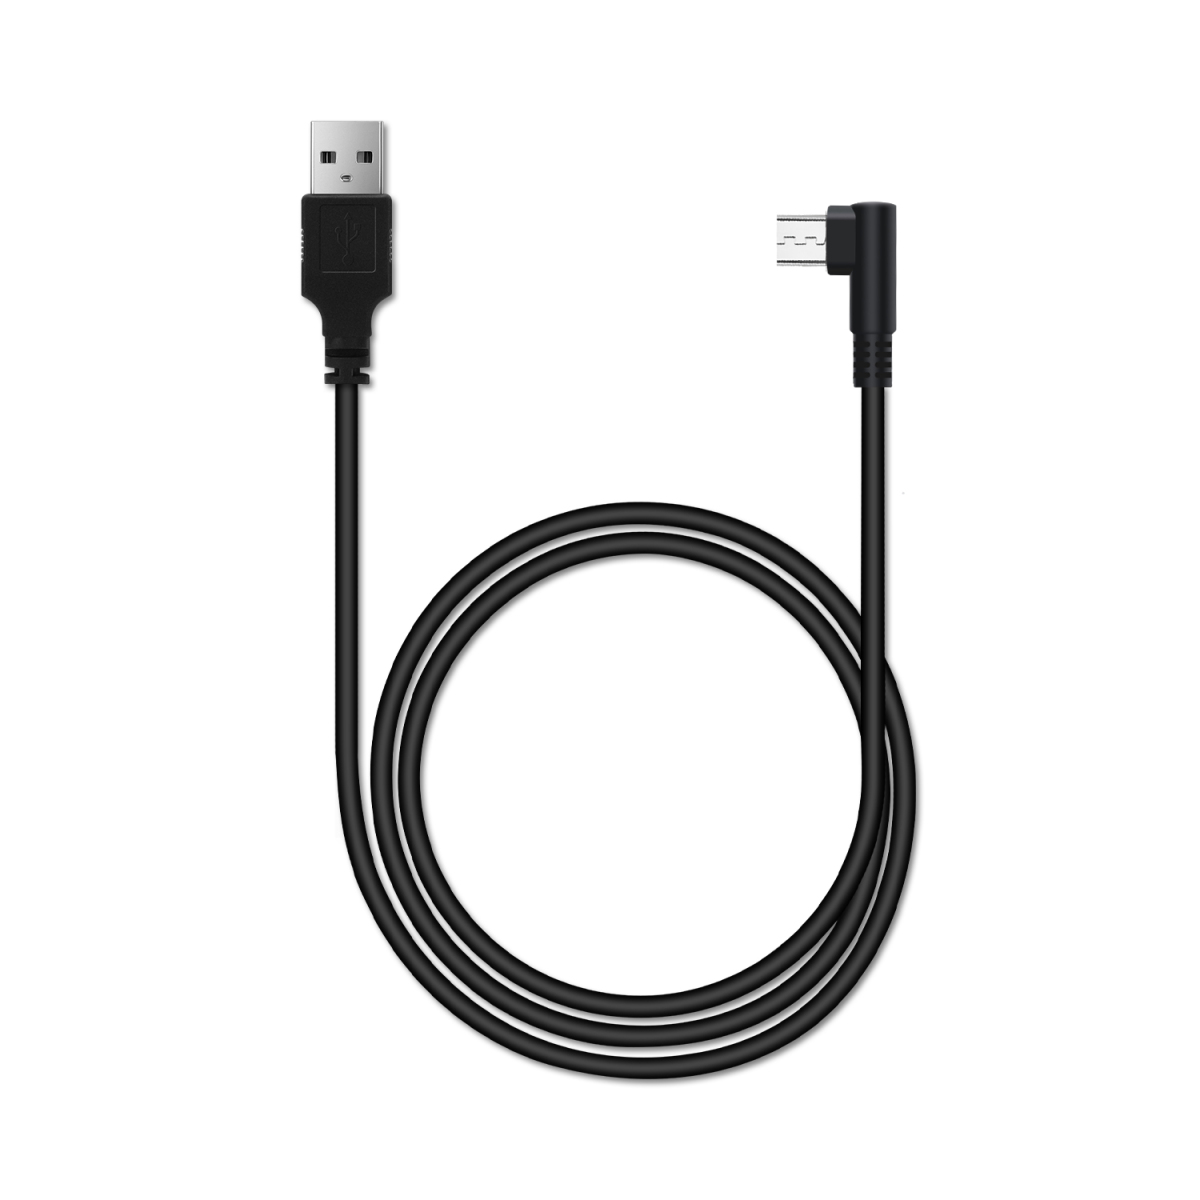 https://prd-huion.oss-accelerate.aliyuncs.com/3/4d5/micro-usb-to-usb-a-cable-1.jpg?x-oss-process=image/resize,m_lfit,w_1200